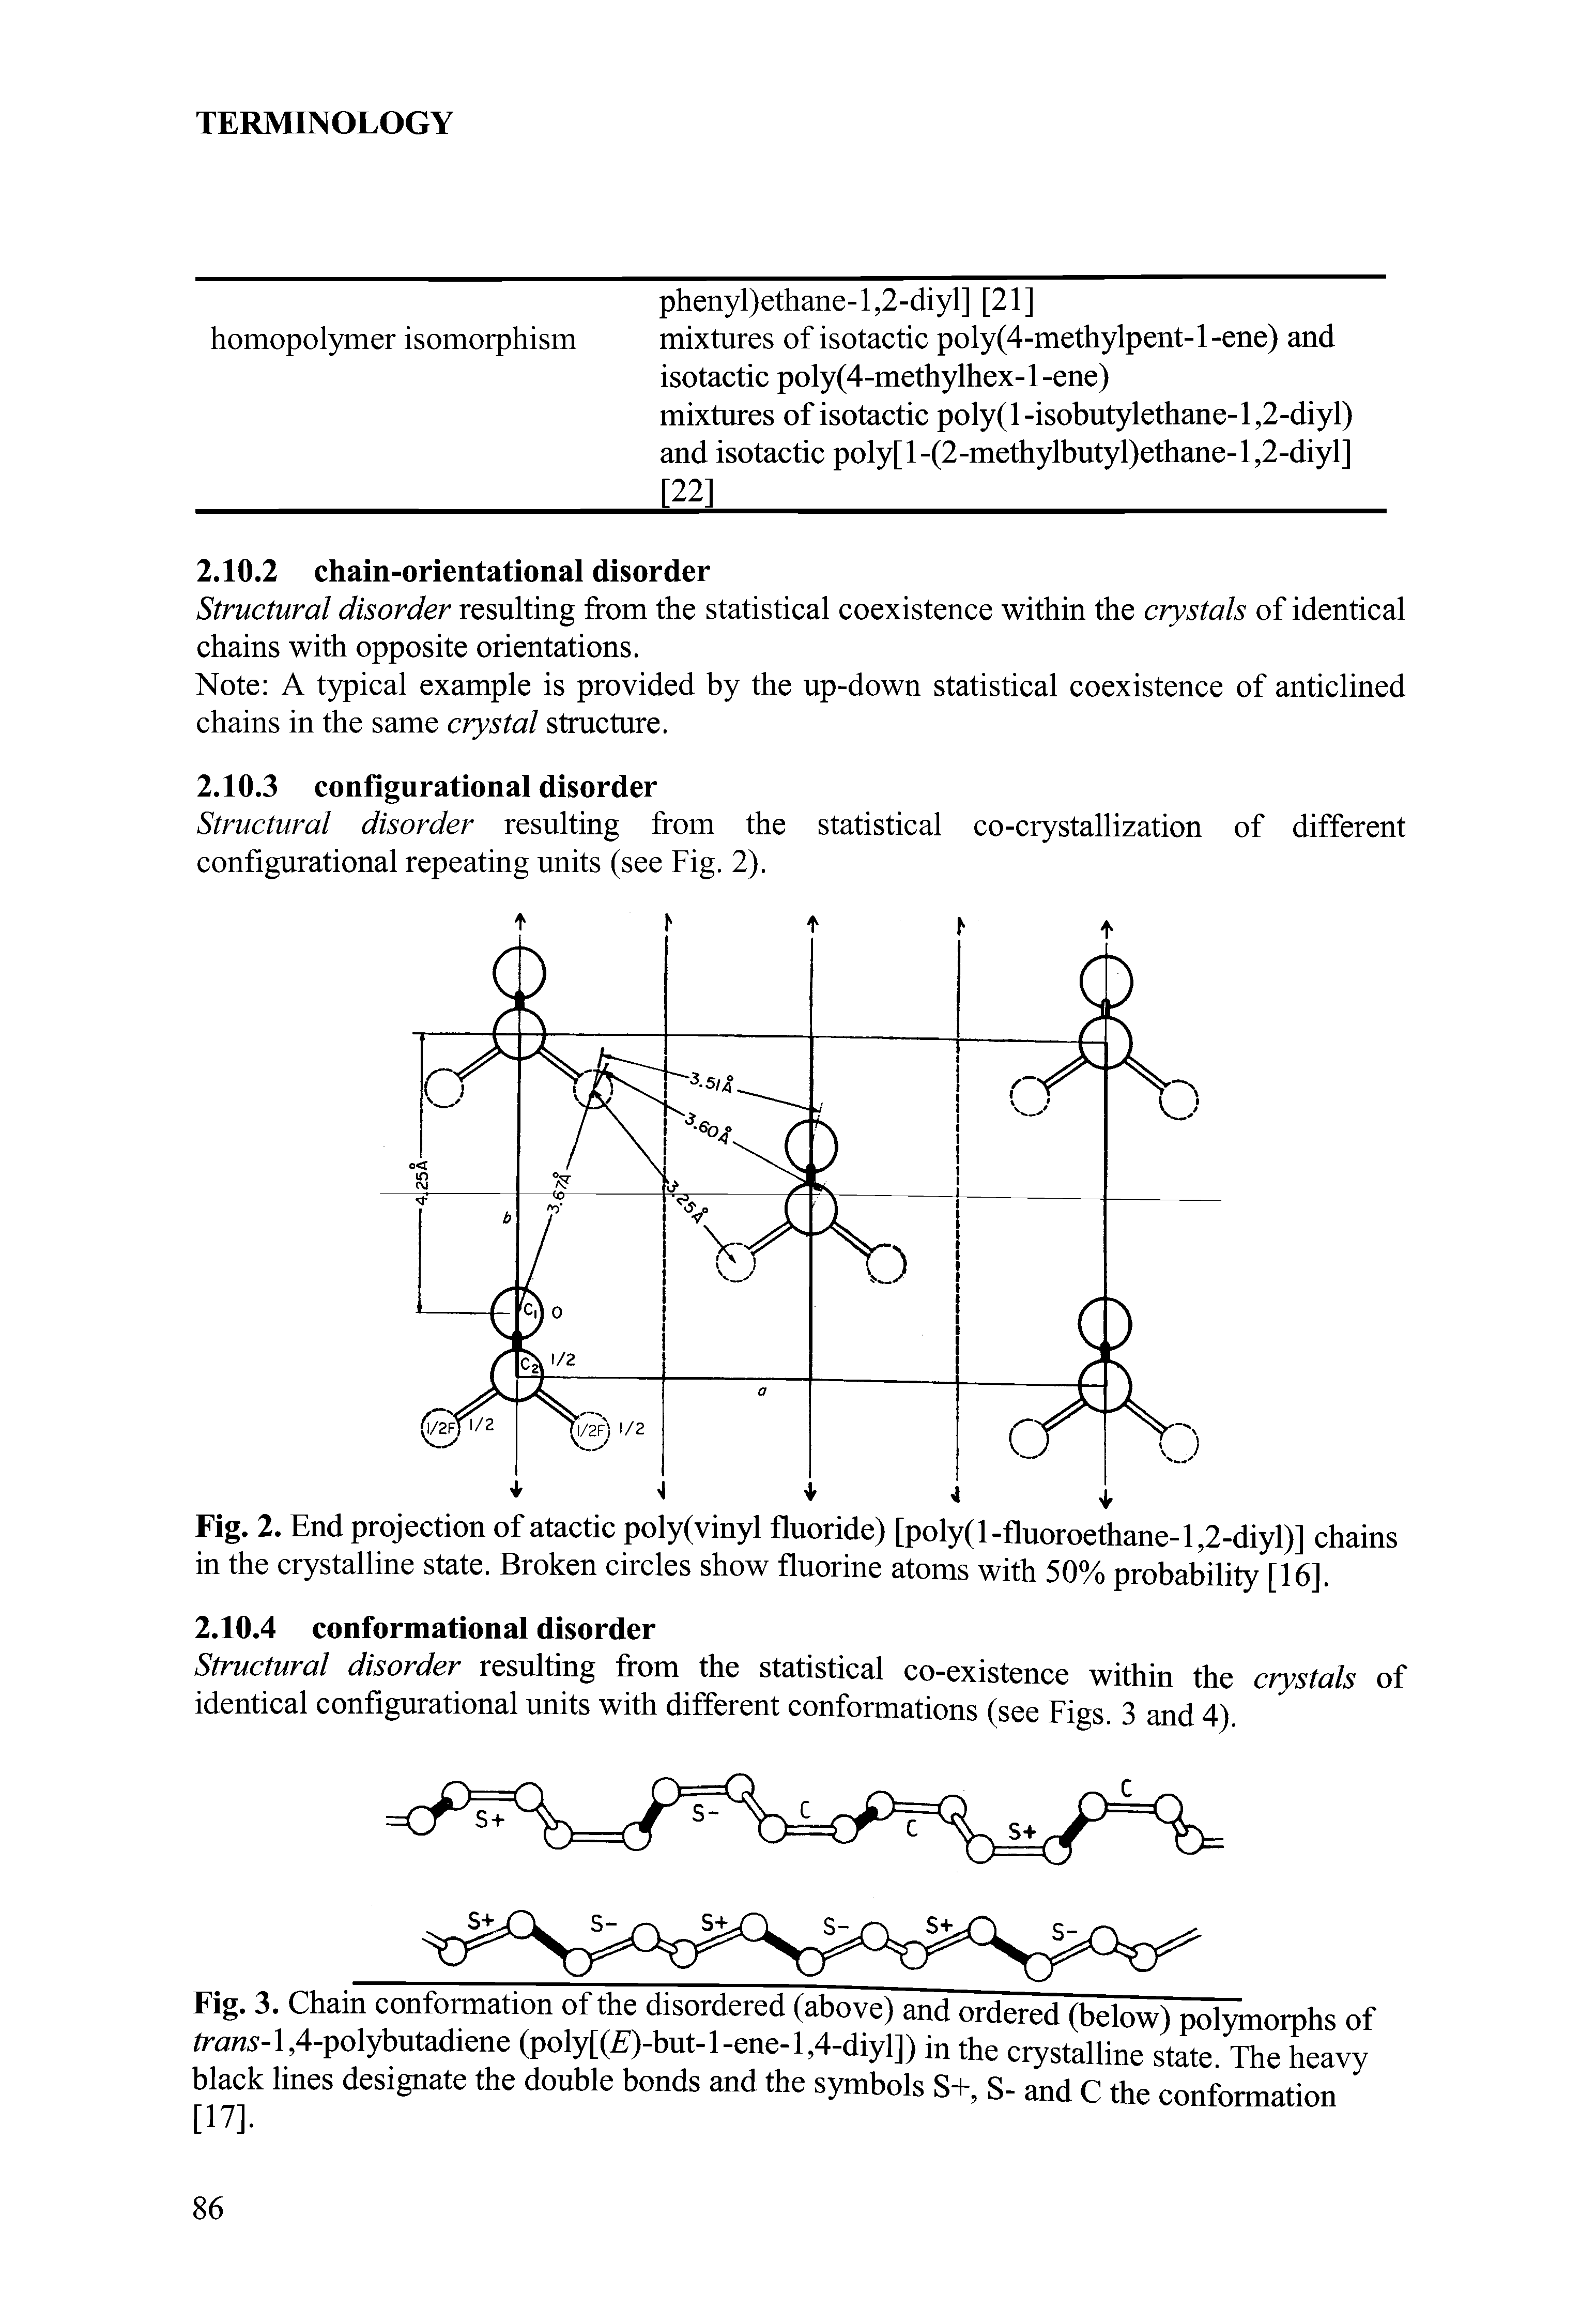 Fig. 3. Chain conformation of the disordered (above) and ordered (below) polymorphs of 4-polybutadiene (poly[( )-but-l-ene-l,4-diyl]) in the crystalline state. The heavy black lines designate the double bonds and the symbols S+, S- and C the conformation [17].